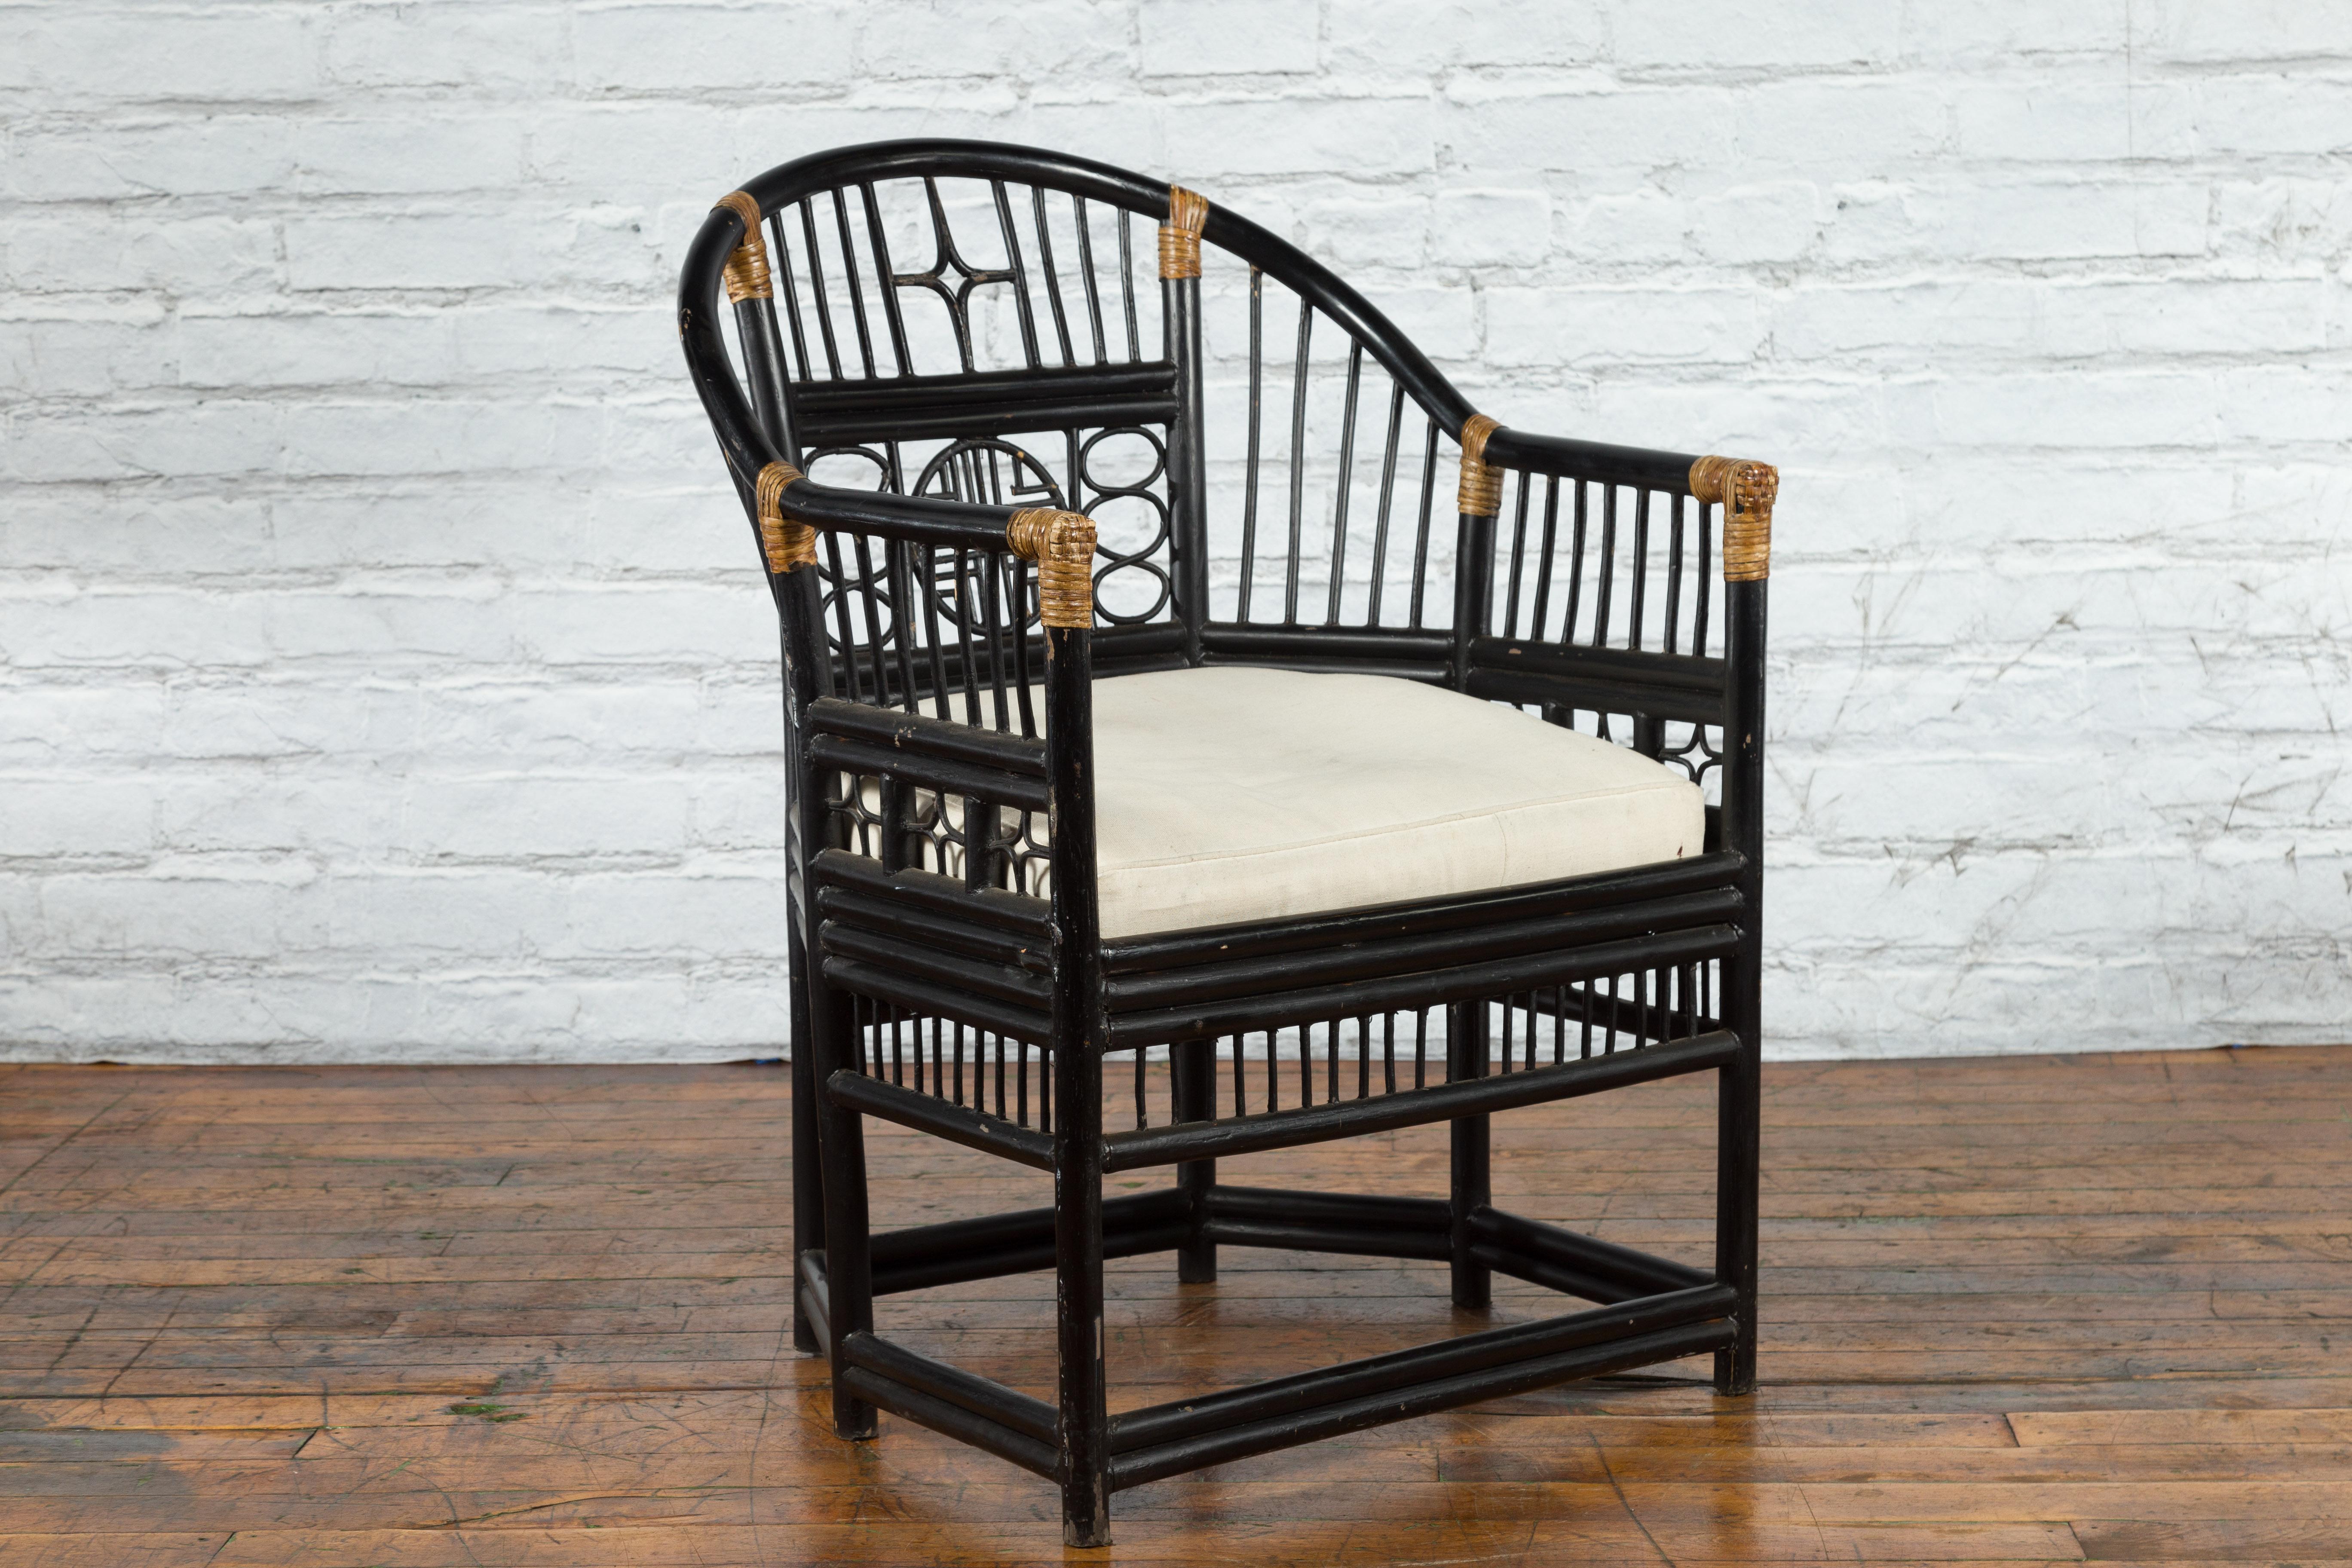 A  horseshoe back black lacquered wooden armchair from the 20th century with bamboo geometric fretwork and cushion. Created during the 20th century, this armchair features an elegant horseshoe back accented in the center with a stylized radiating